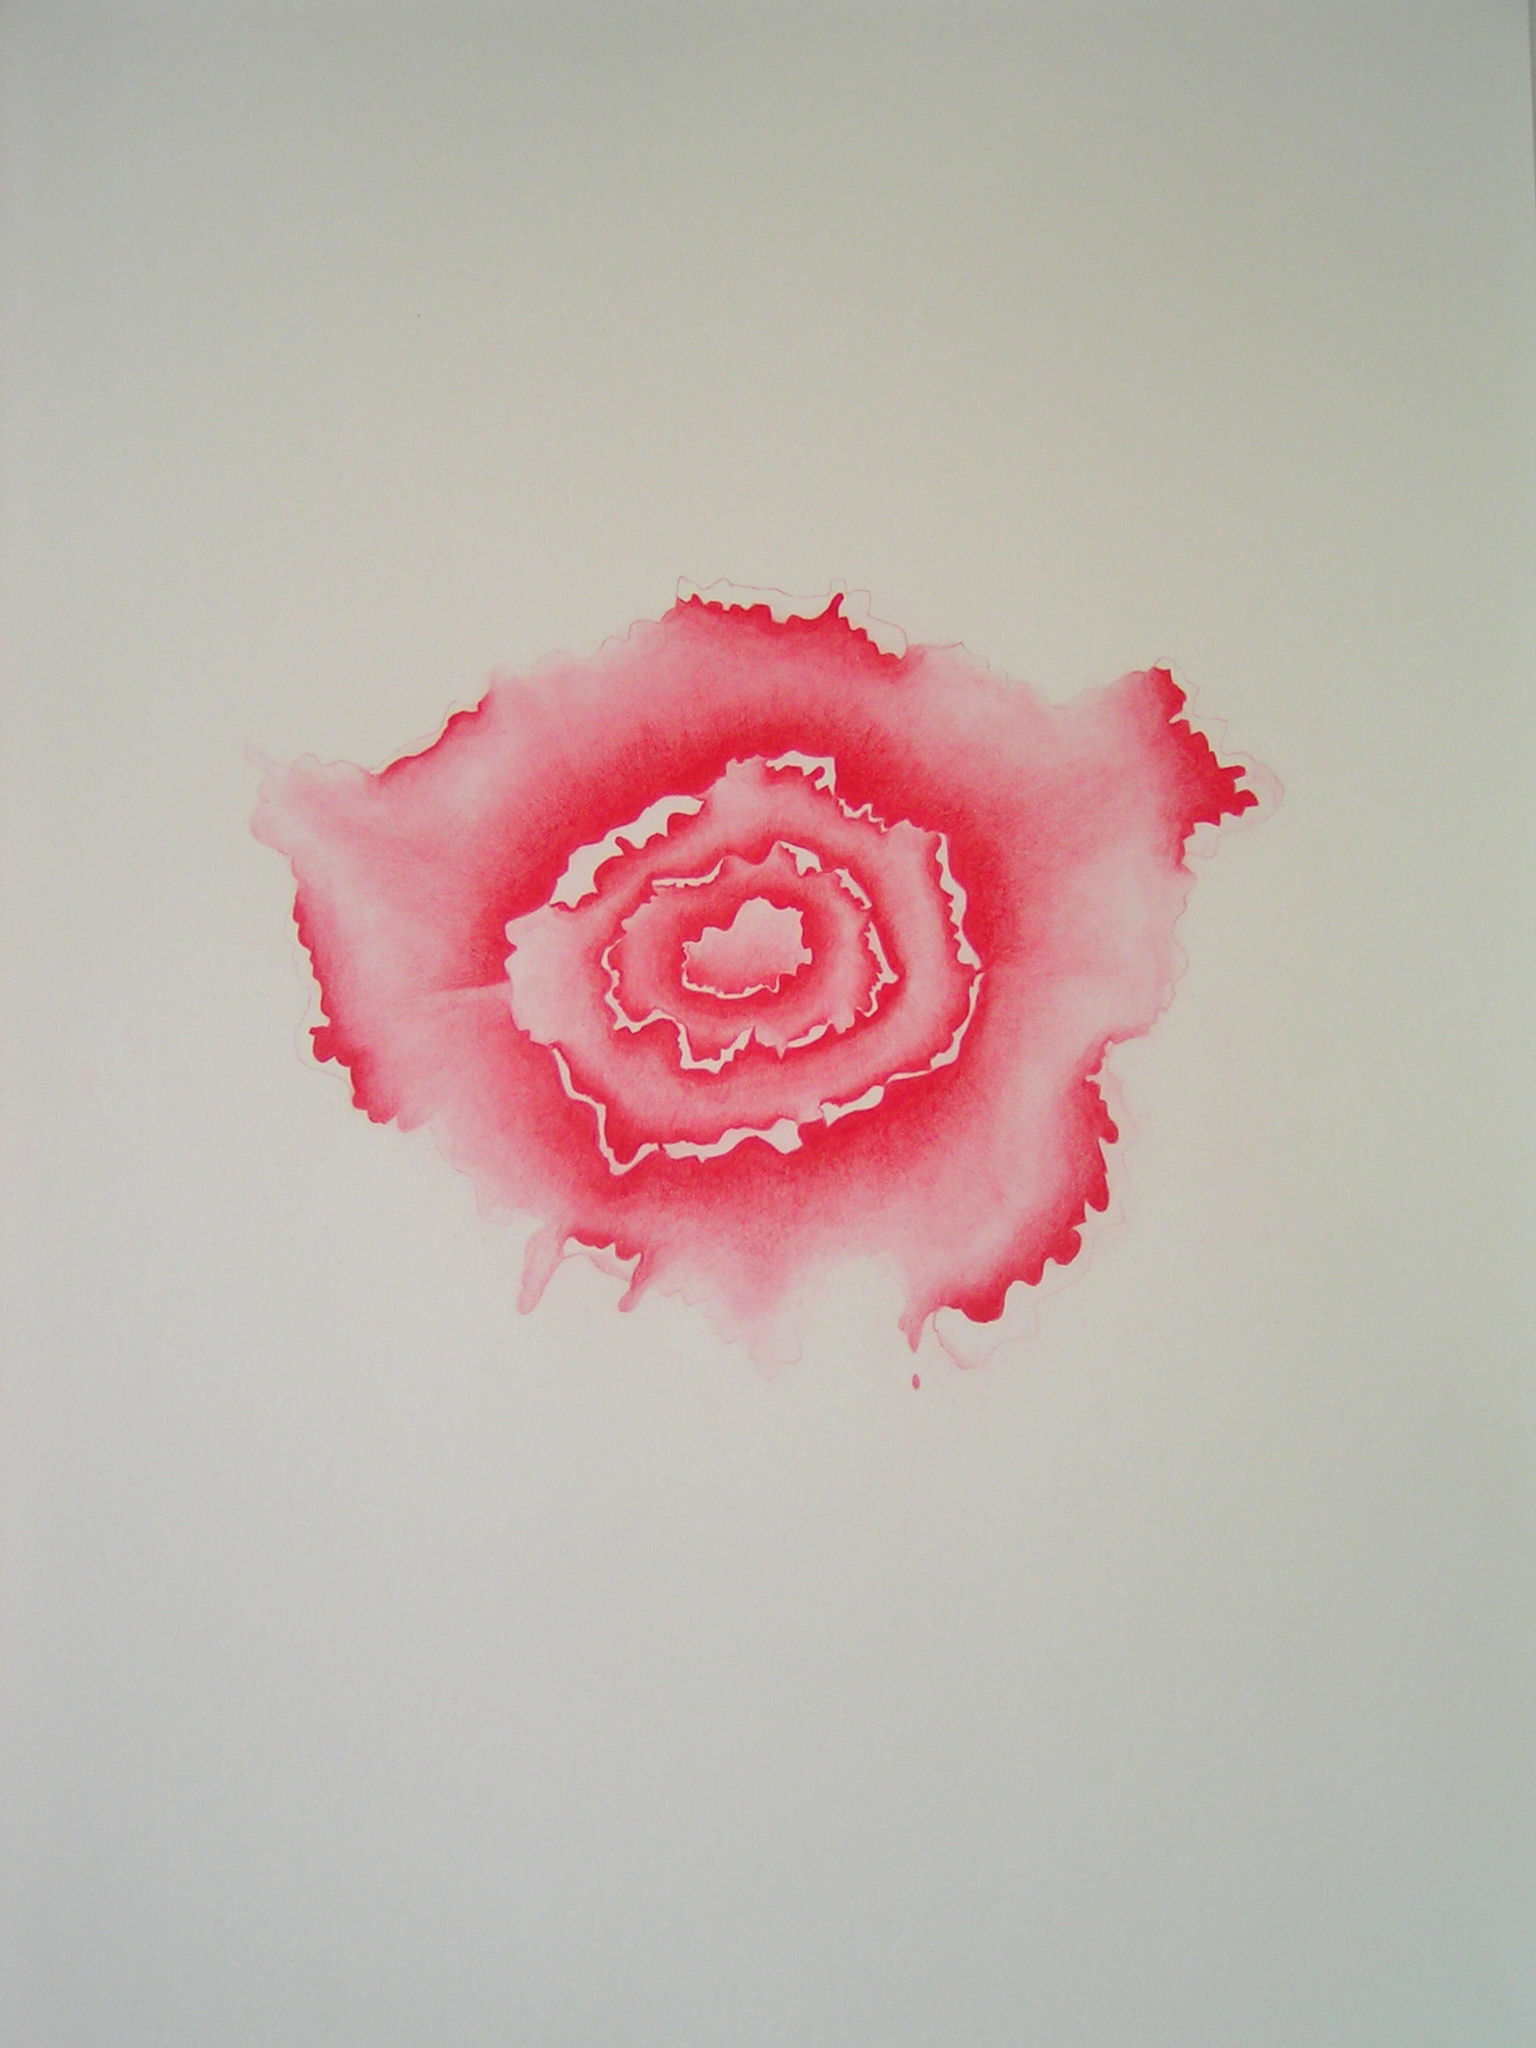 Emma J Williams 'Blooming London Series - Deep Red' 2008 pencil on paper